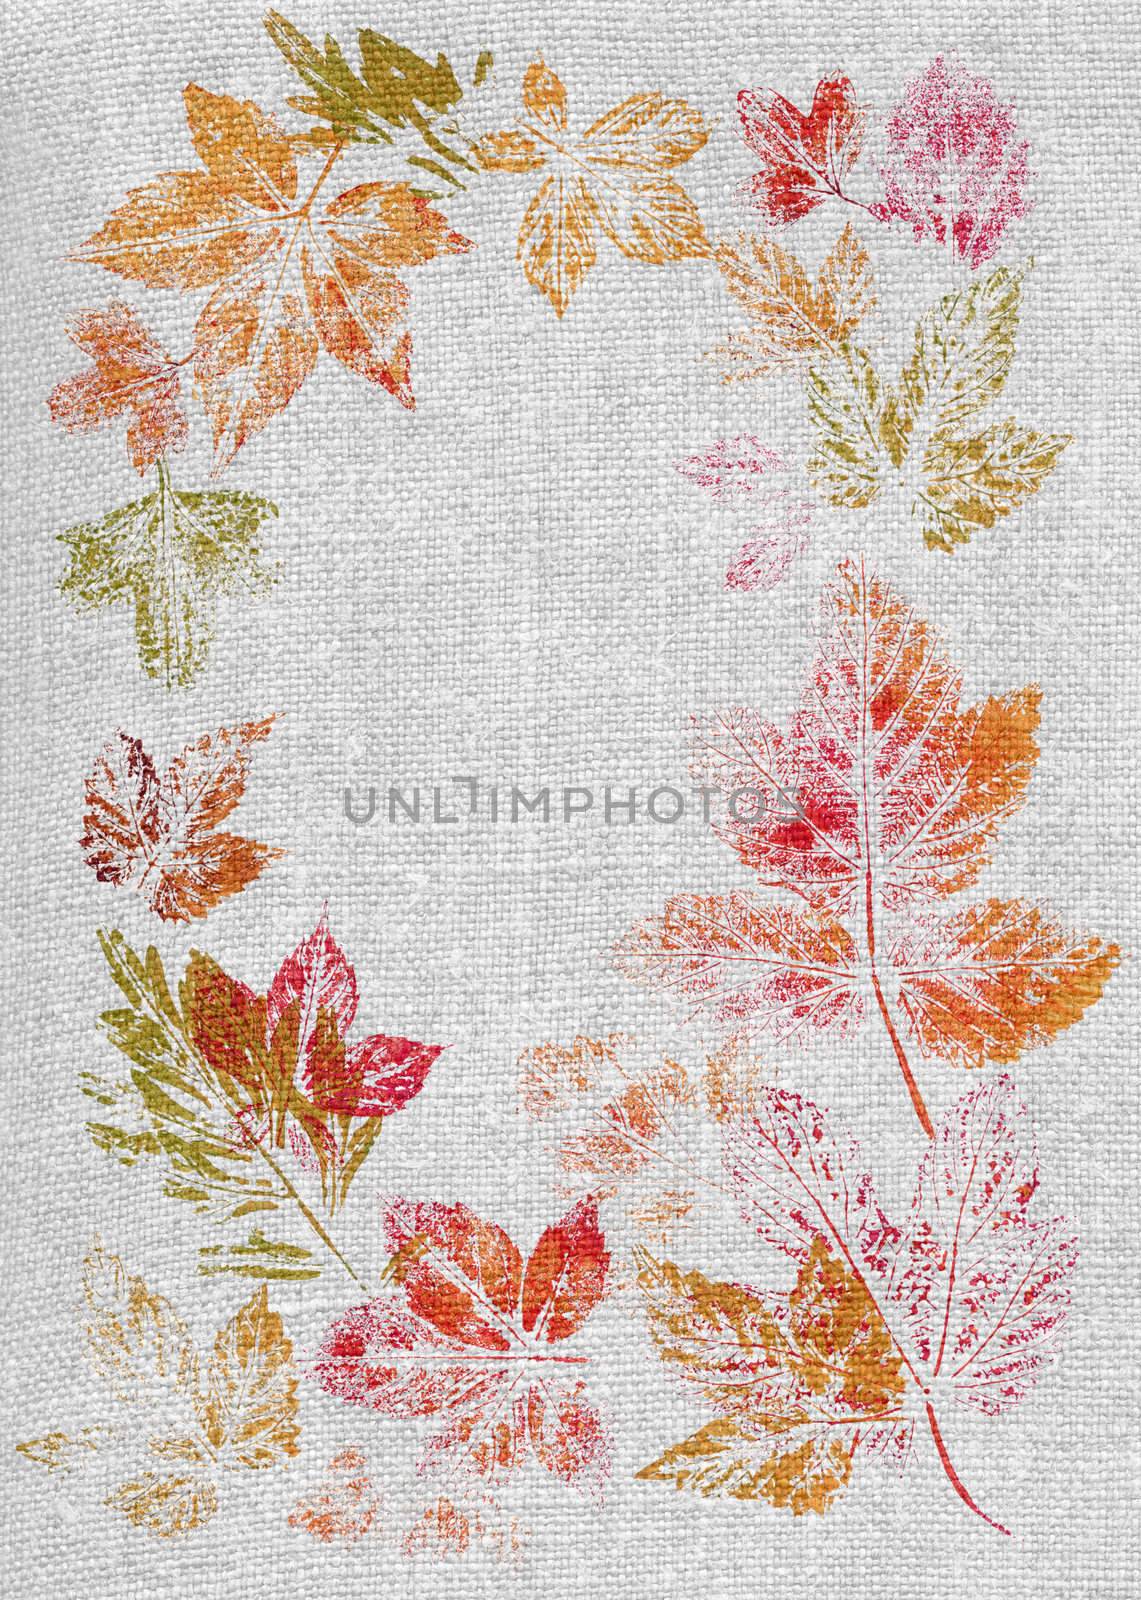 Leaves on a canvas by alexcoolok